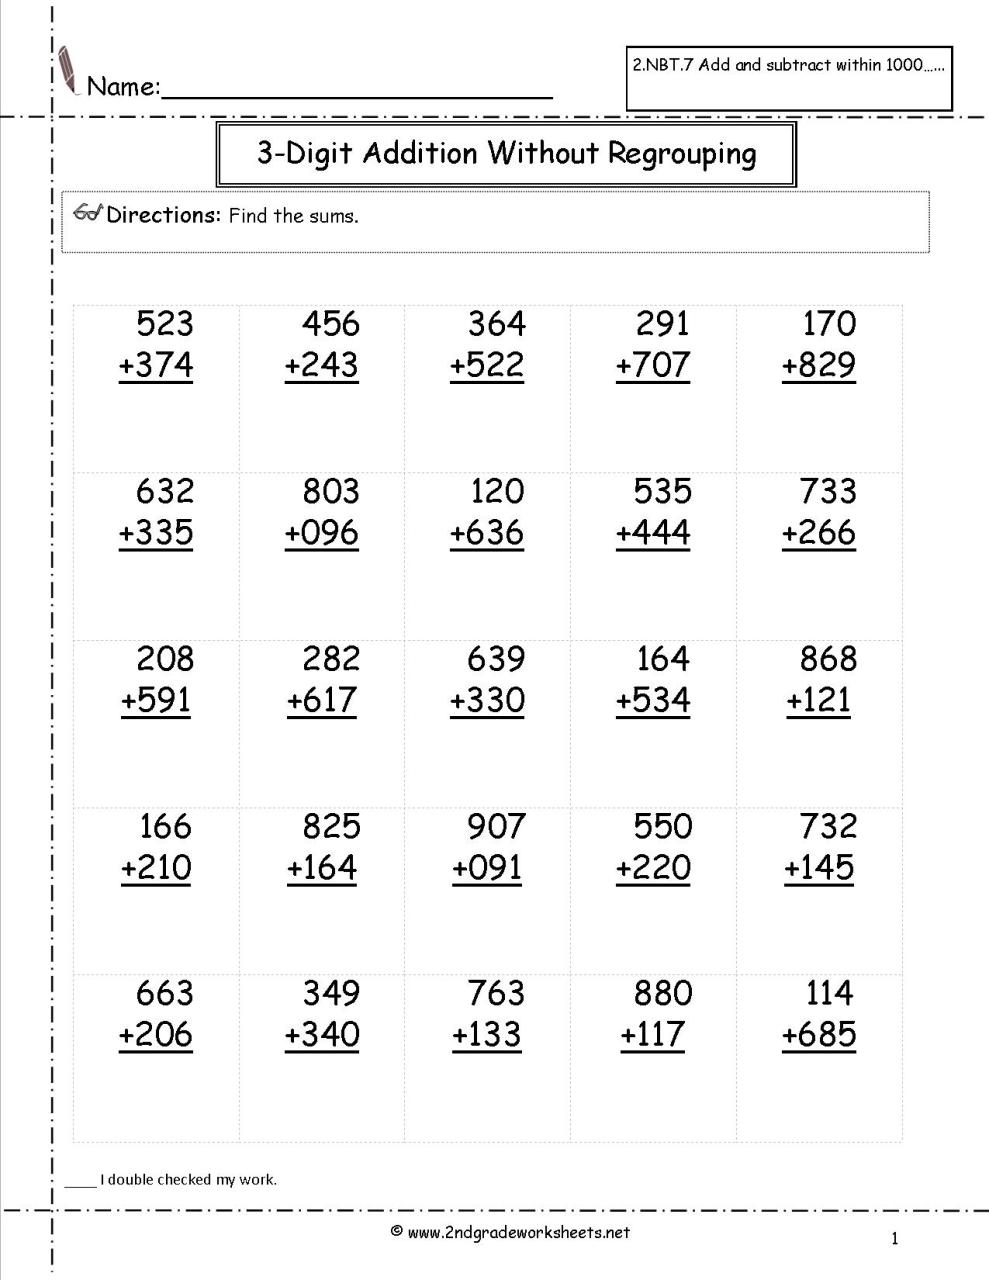 15 Best Images of Adding Hundreds Worksheets Adding Two Digit Numbers